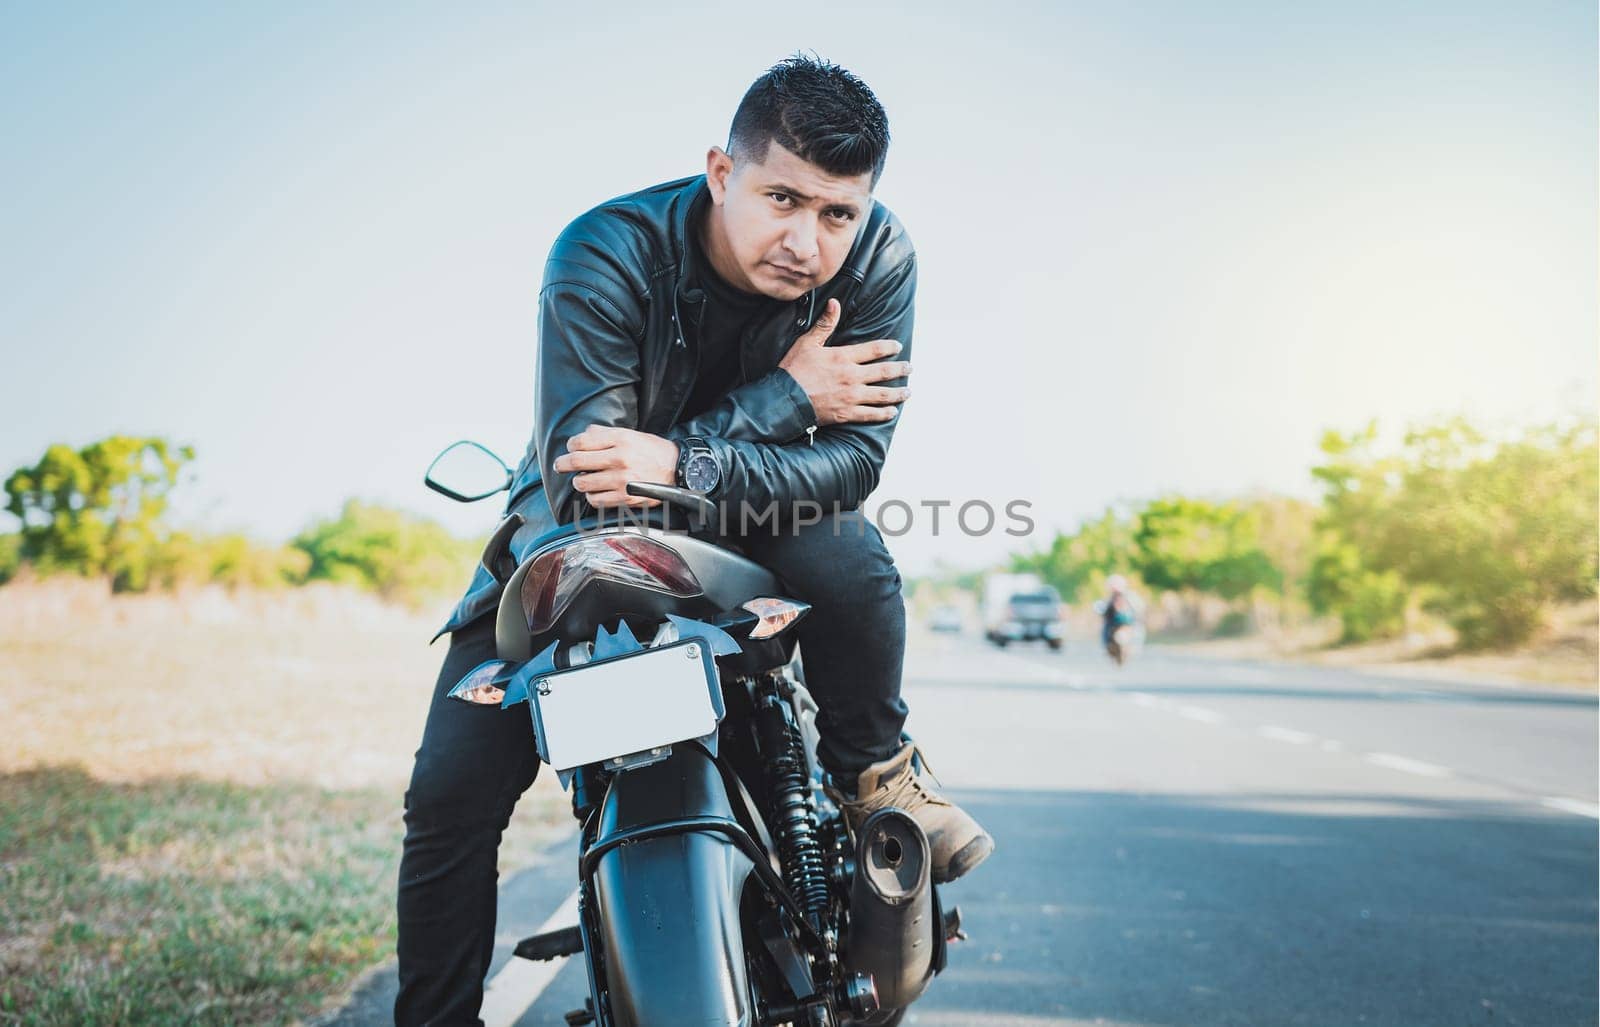 Portrait of handsome biker on his motorbike looking at camera outdoors. Handsome motorcyclist in jacket sitting on his motorcycle at the side of the road